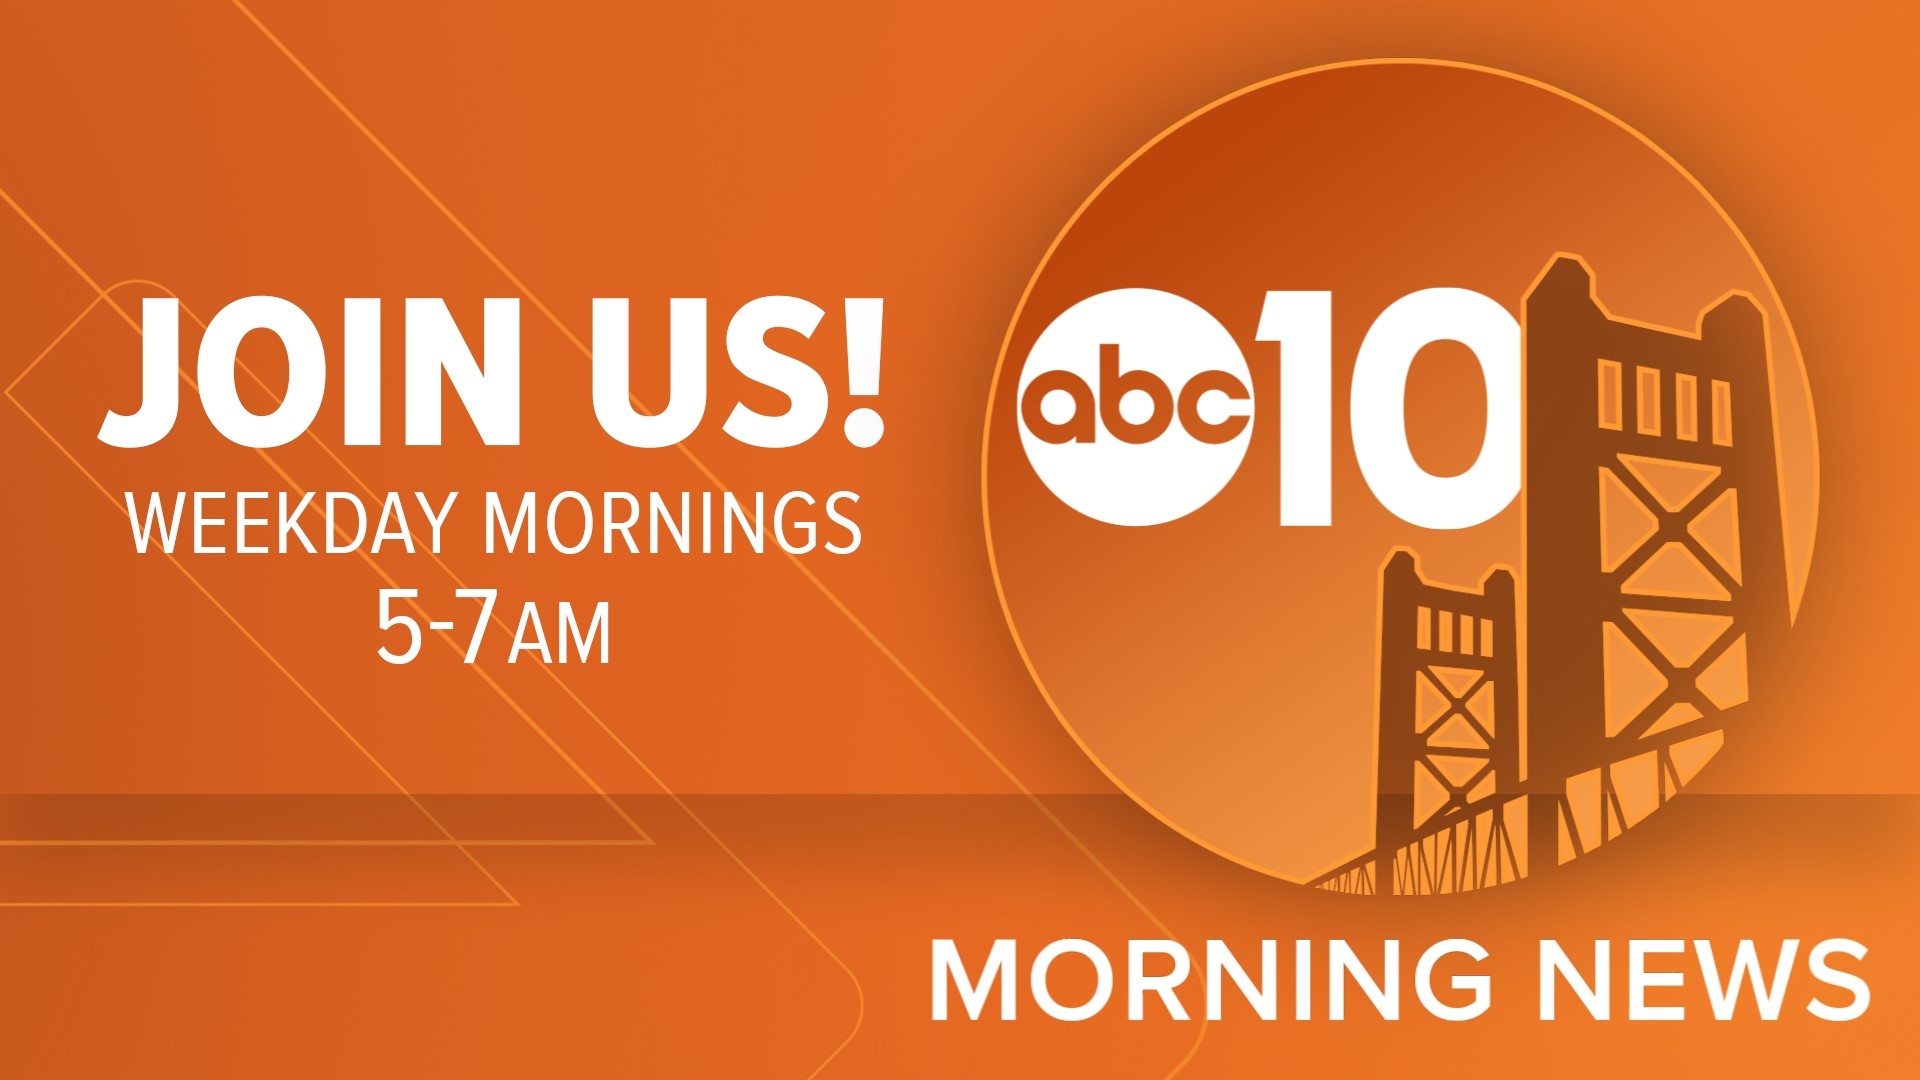 ABC10 morning news from 5 a.m. to 11 a.m. on ABC10+